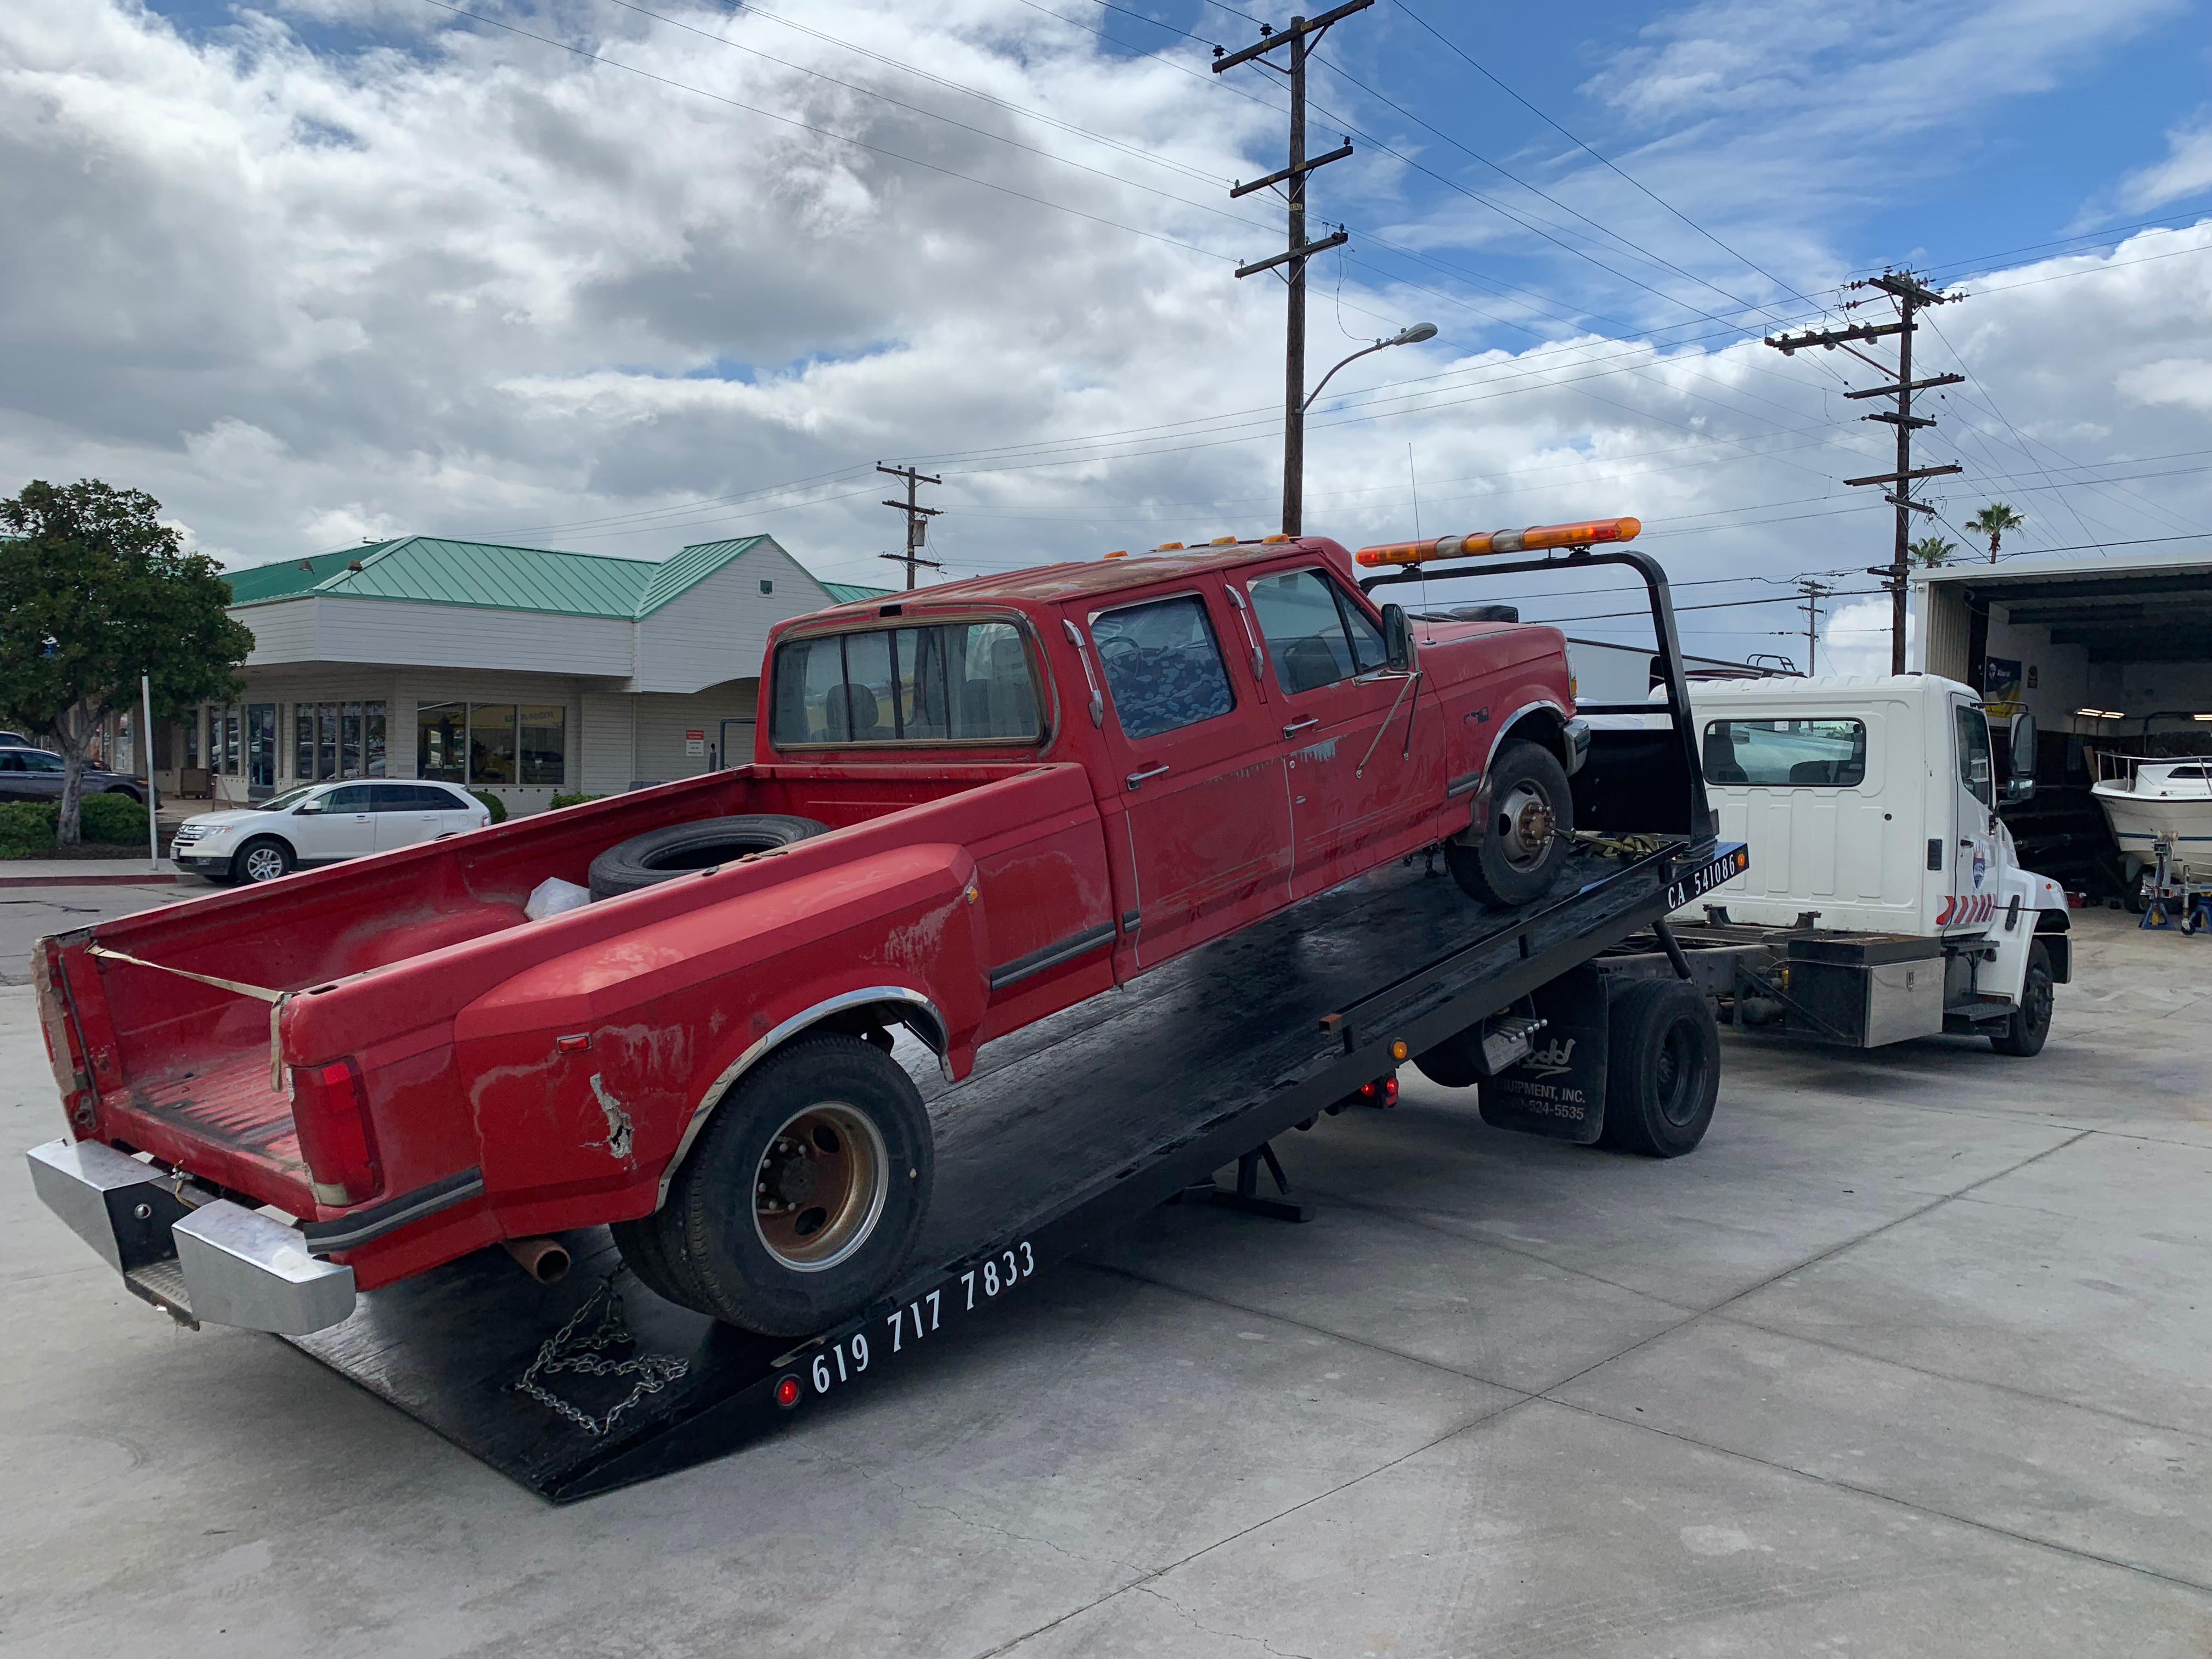 Cali Kings Towing | San Diego, CA | Accident Recovery | Emergency Roadside Assistance | Flatbed Towing